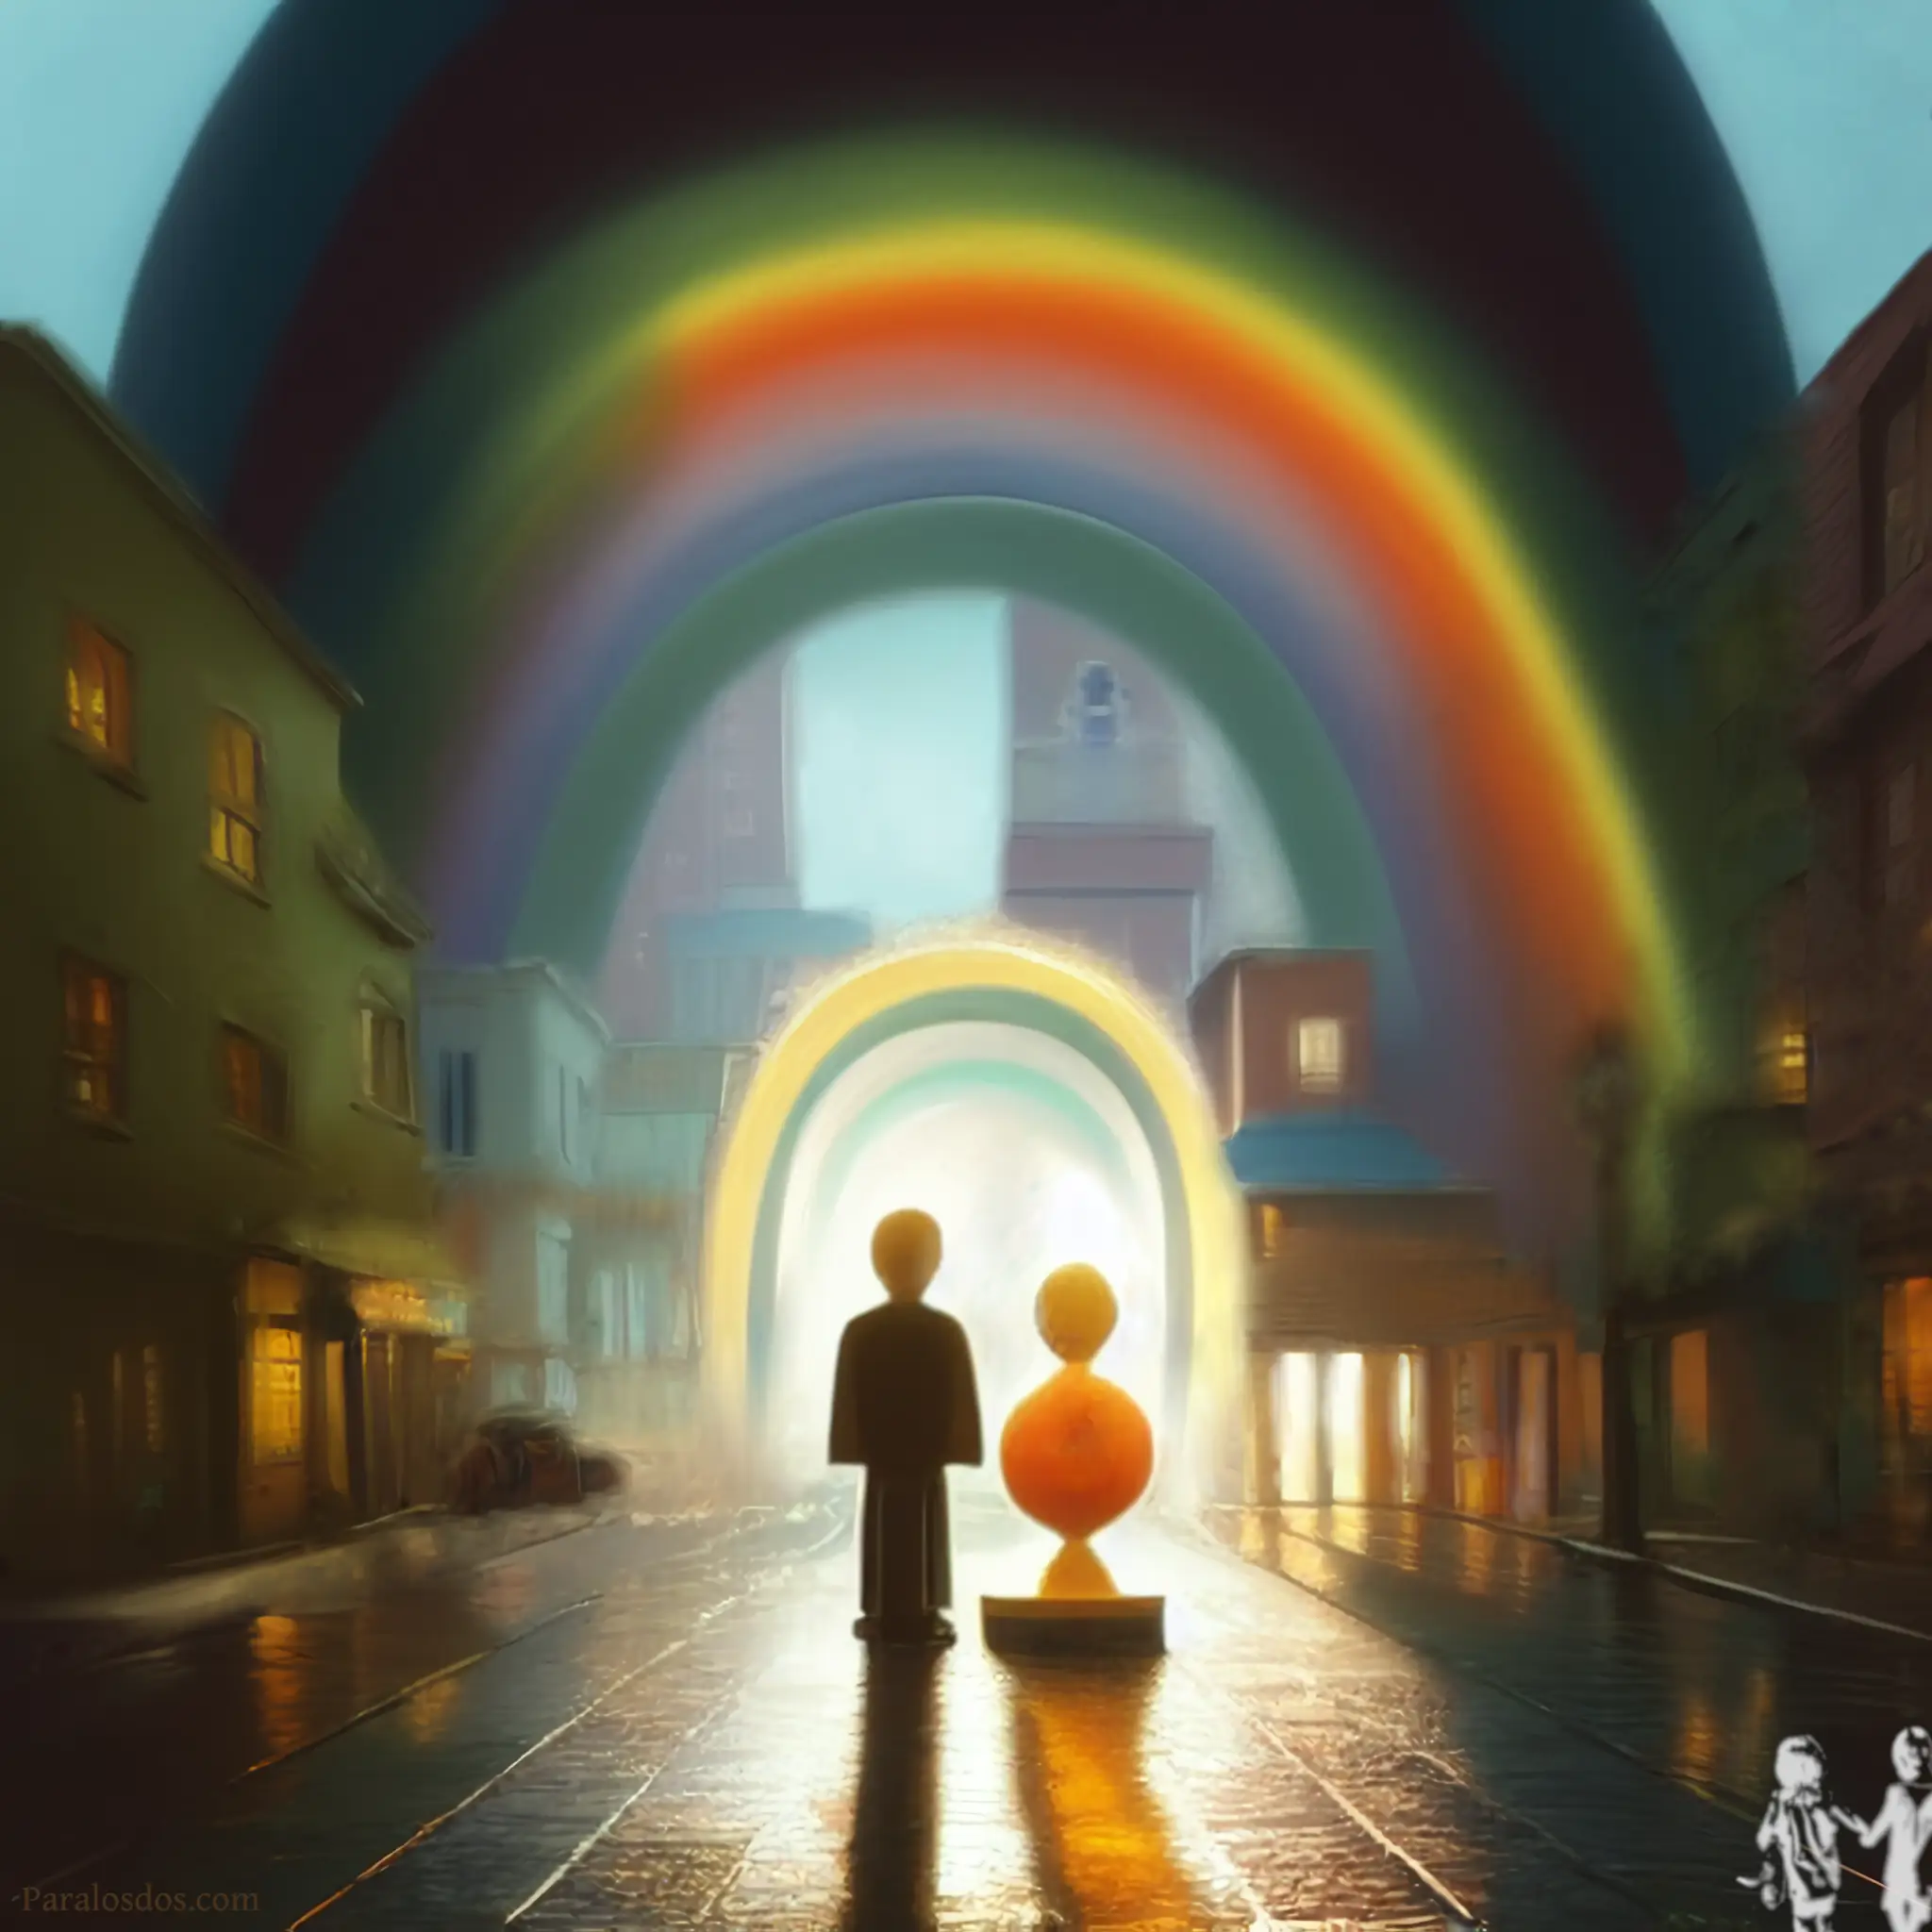 A fantastical artistic rendering of a human figure standing beside a robot figure and a city street. They are facing an arch that has another arch above it. The second arch has rainbow colours.